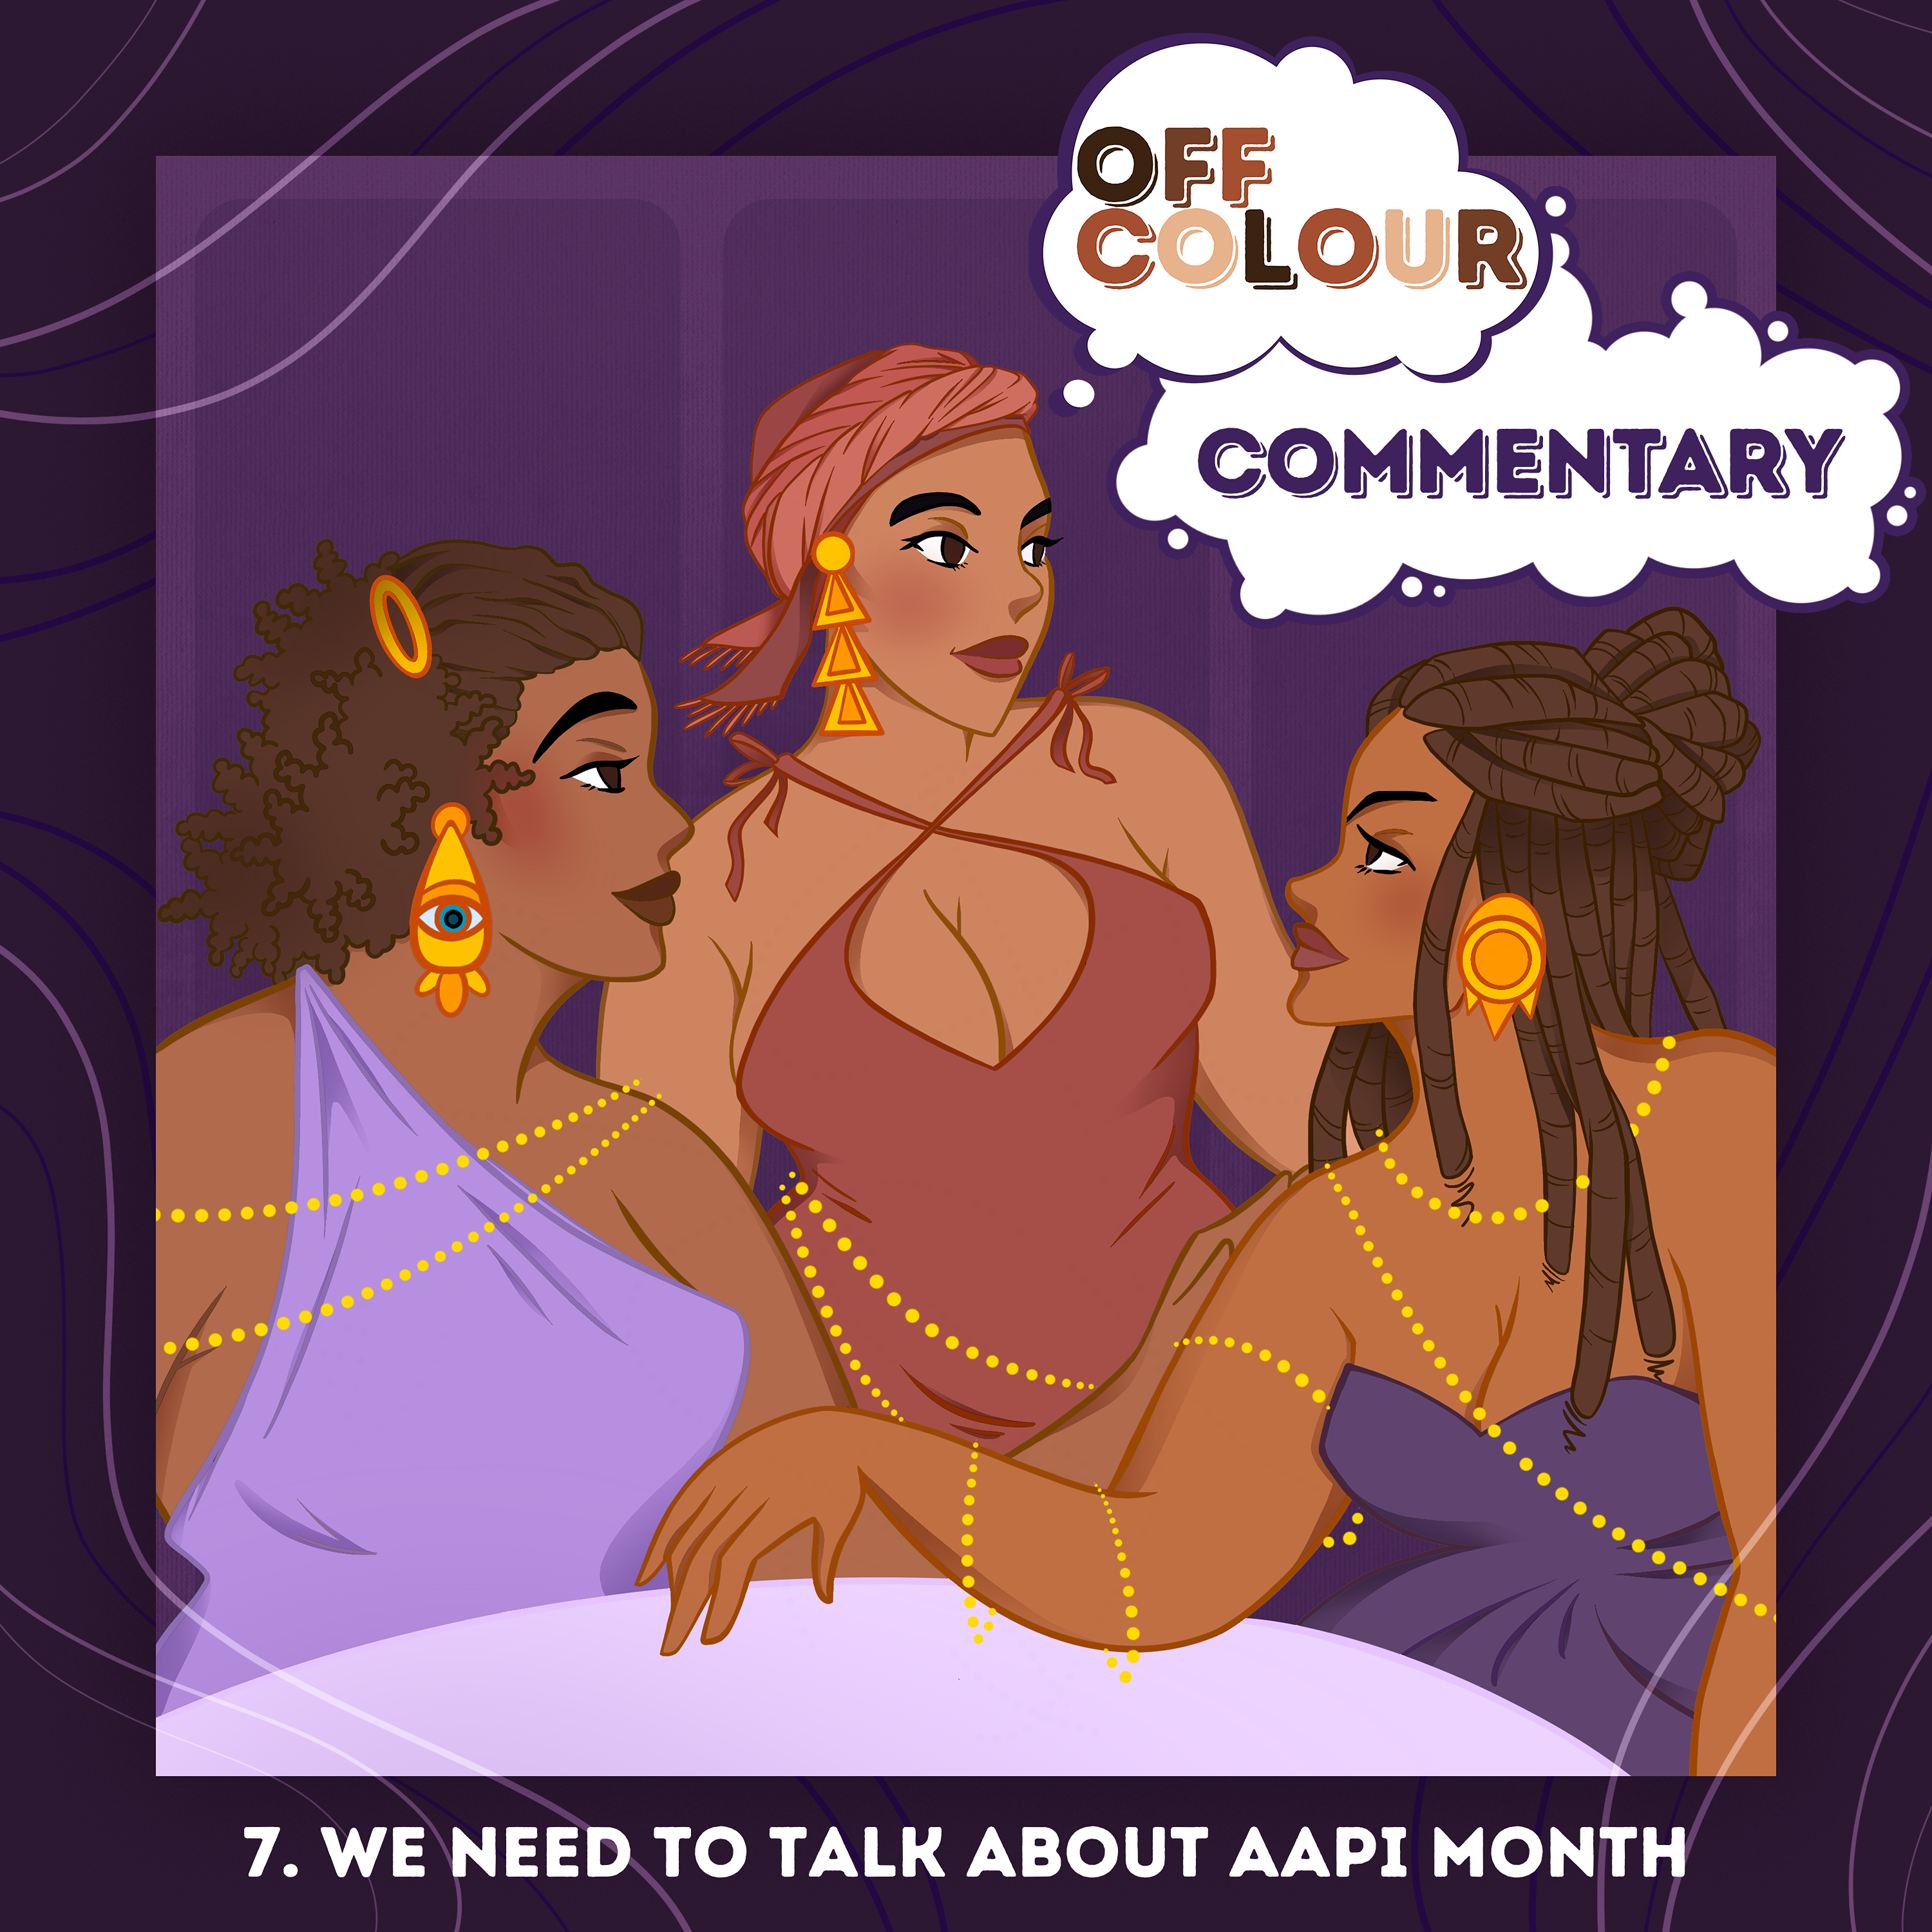 7. We Need To Talk About AAPI Month